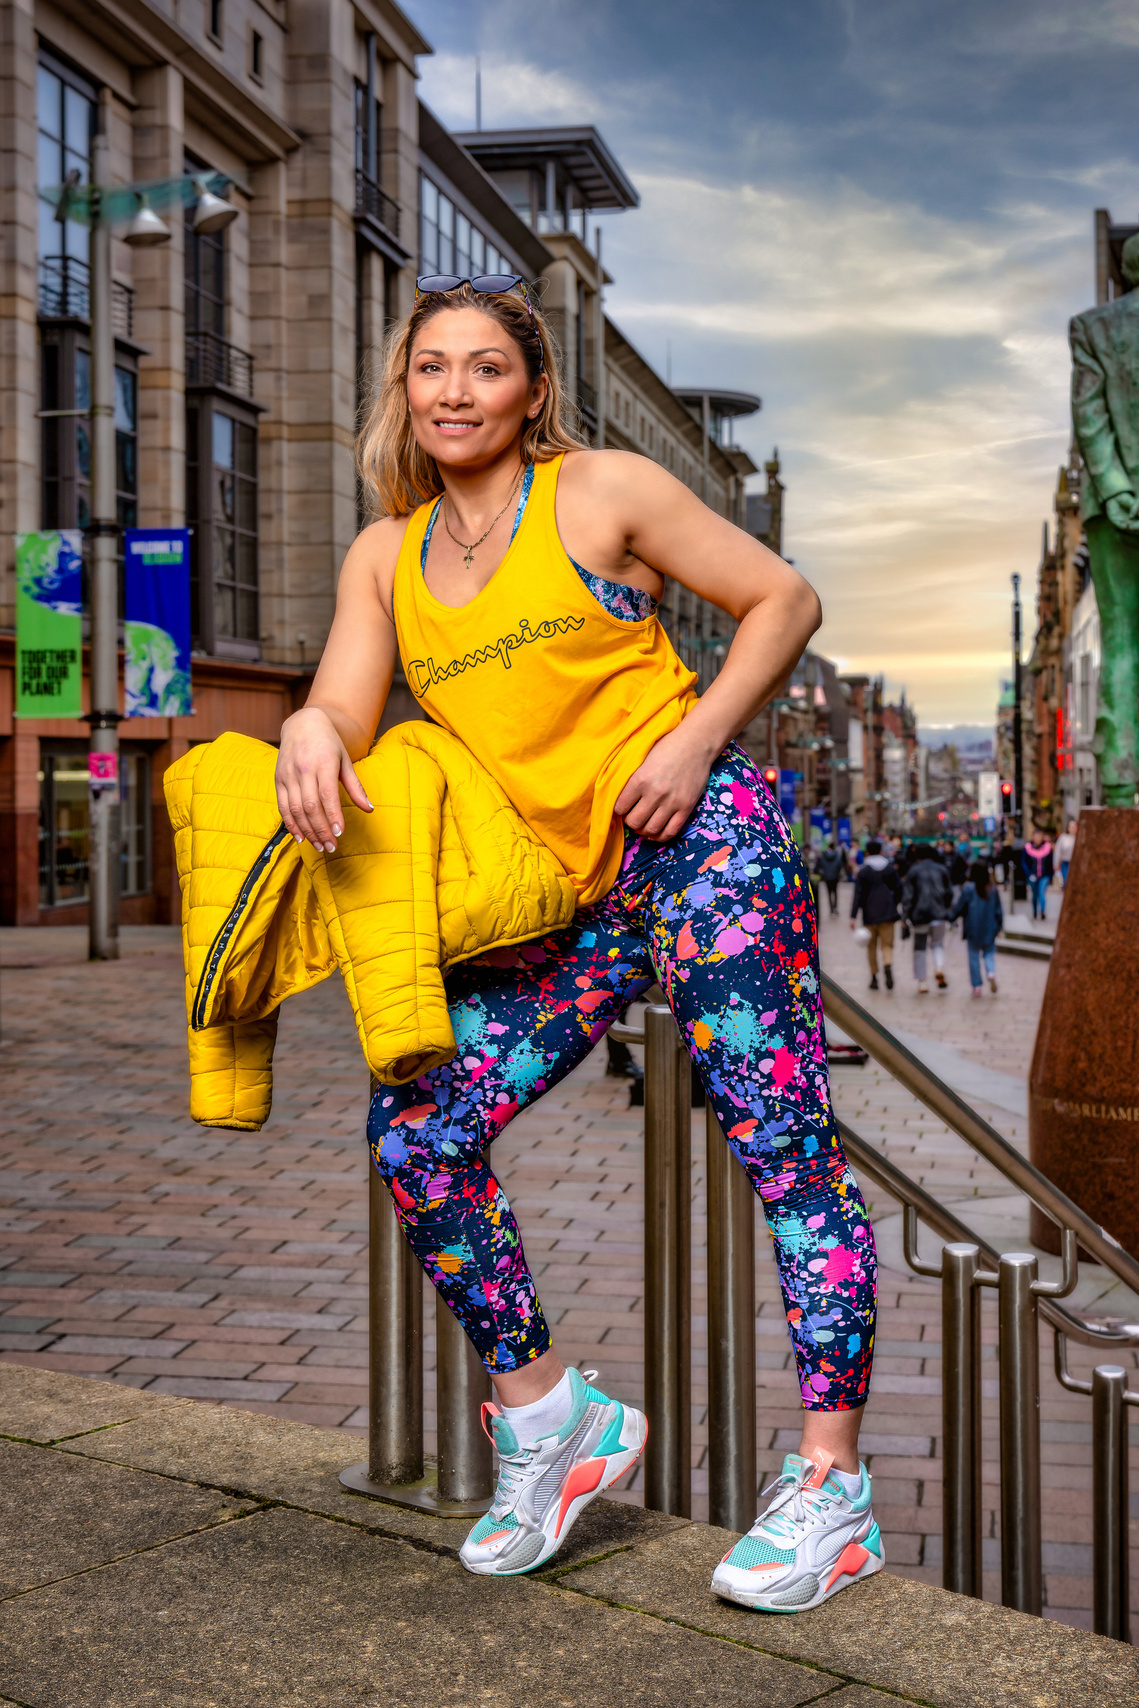 Scotland Commercial Fashion Photography for Funzies Leggings in Glasgow - Photography by Nate Cleary